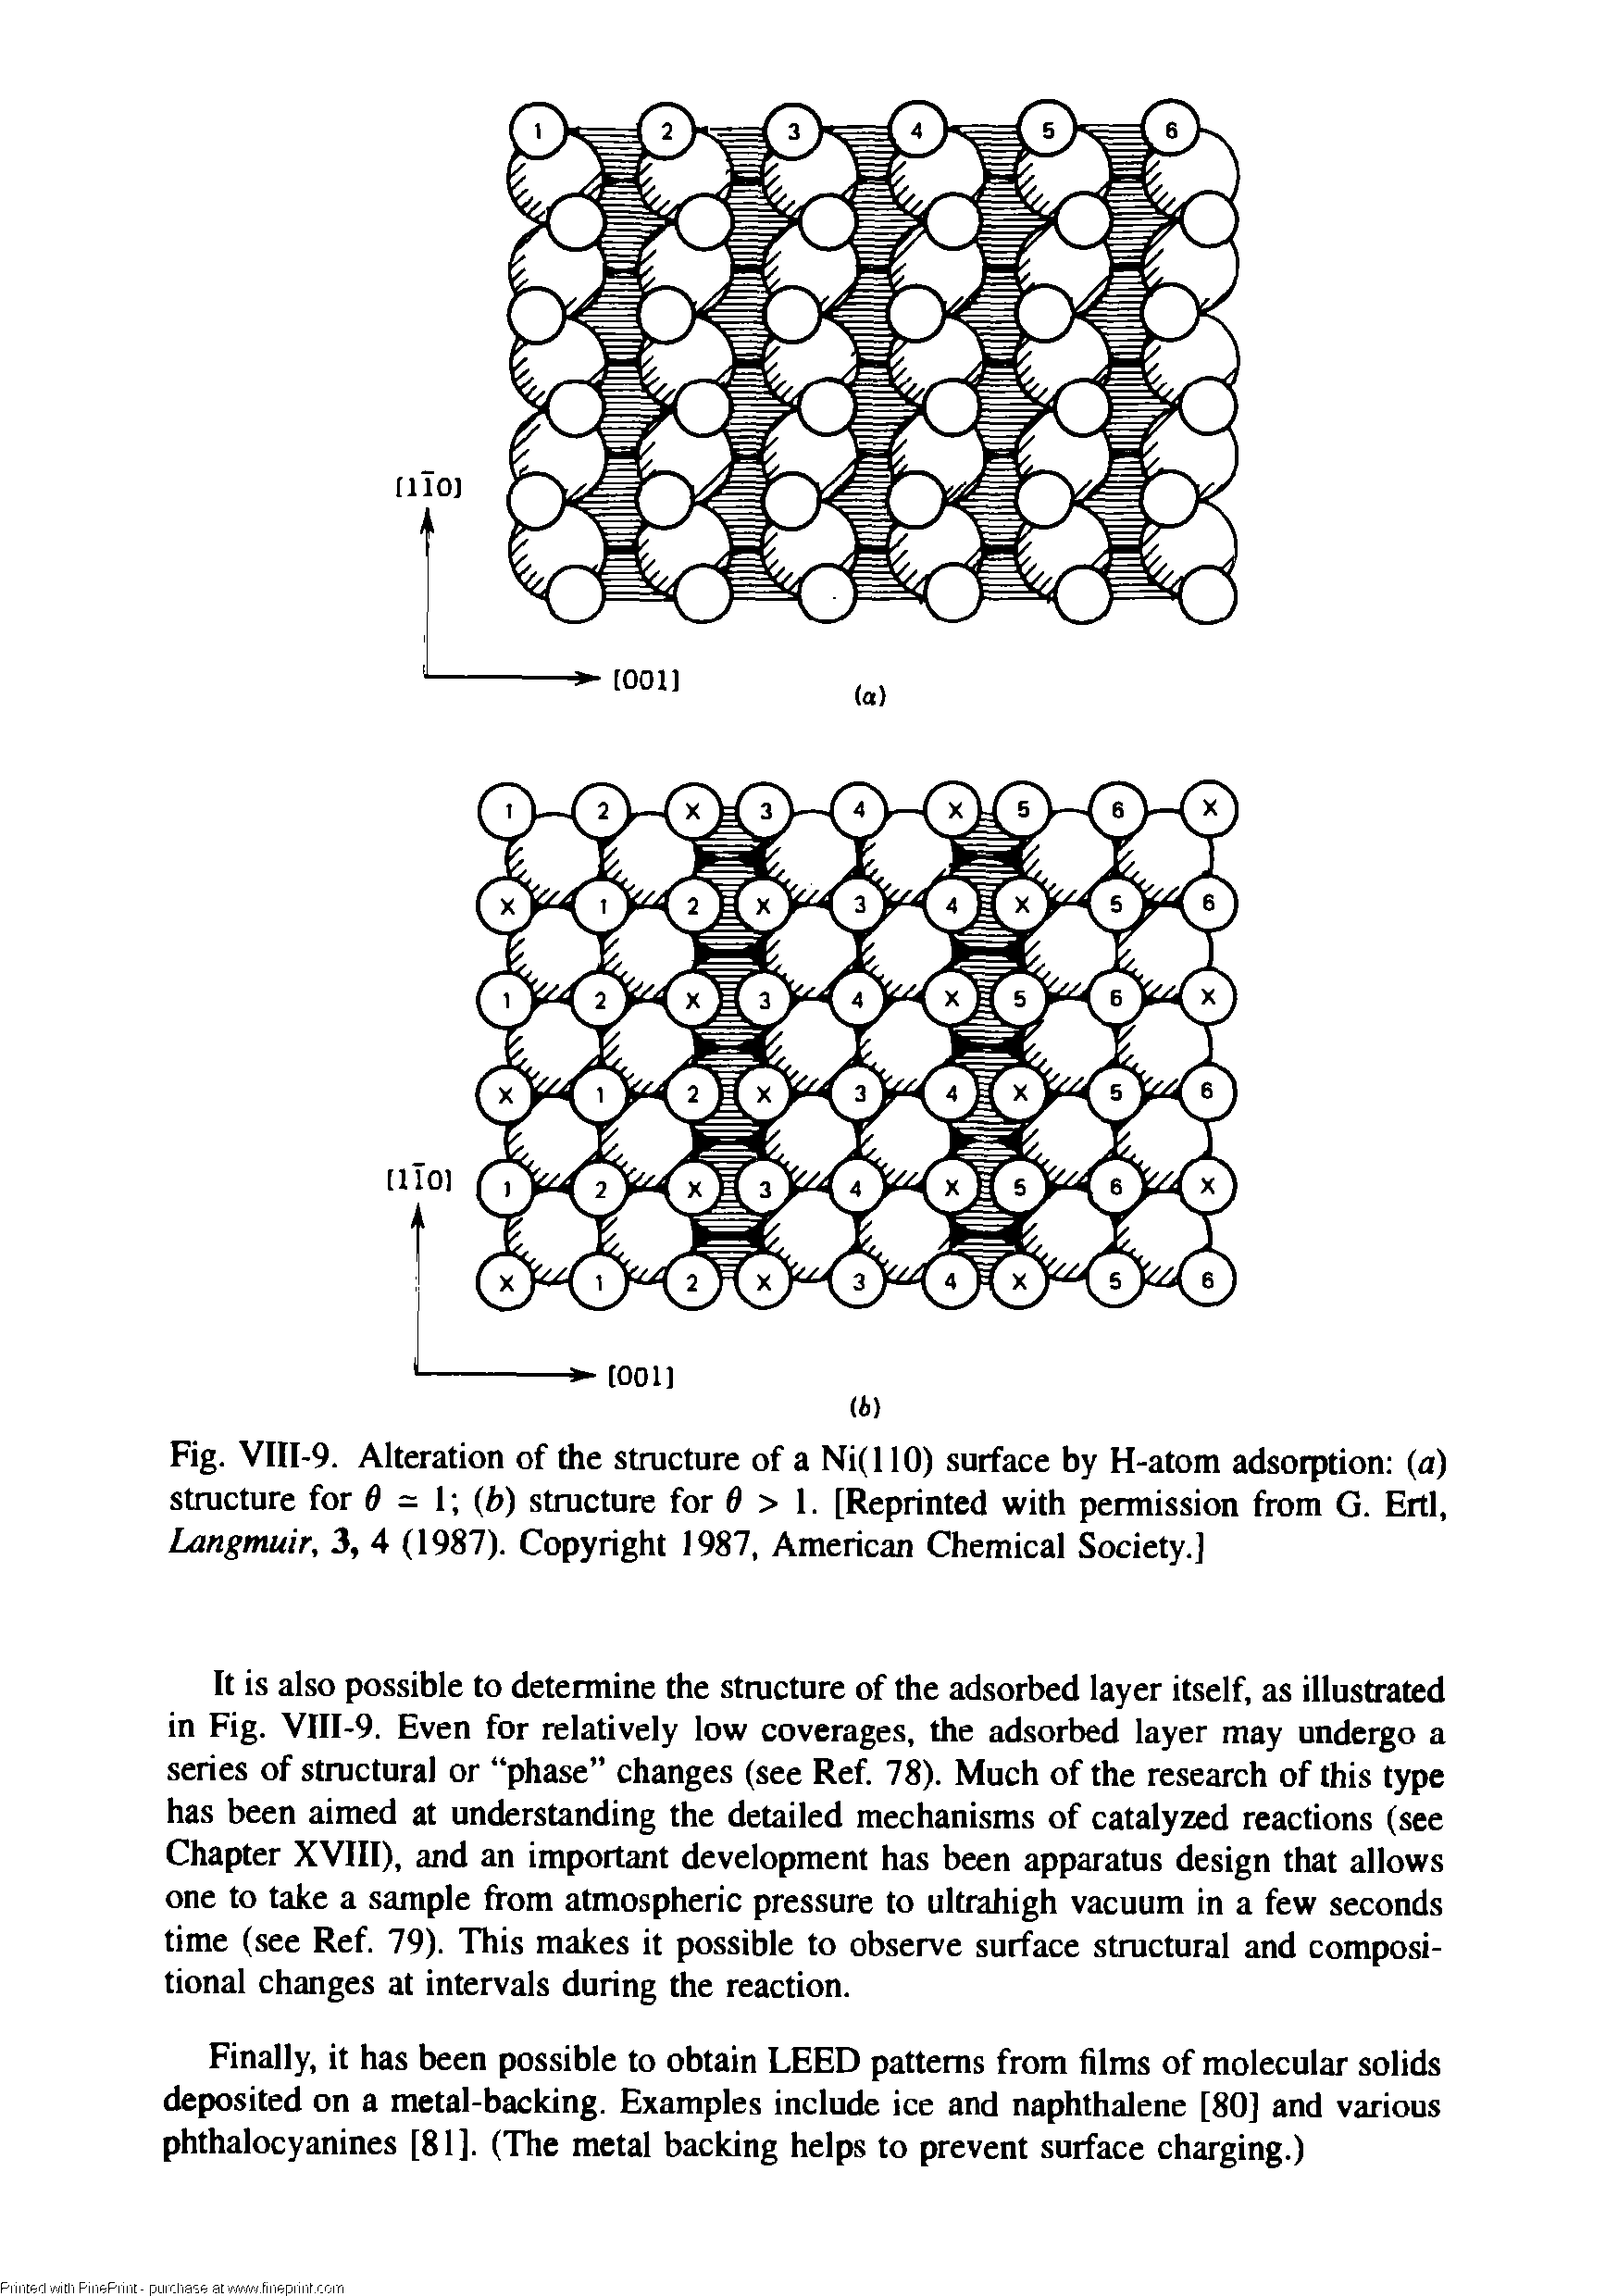 Fig. VIII-9. Alteration of the structure of a Ni(llO) surface by H-atom adsorption (a) structure for 0 = 1 (b) structure for 0 > 1. [Reprinted with permission from G. Ertl, Langmuir, 3, 4 (1987). Copyright 1987, American Chemical Society.]...